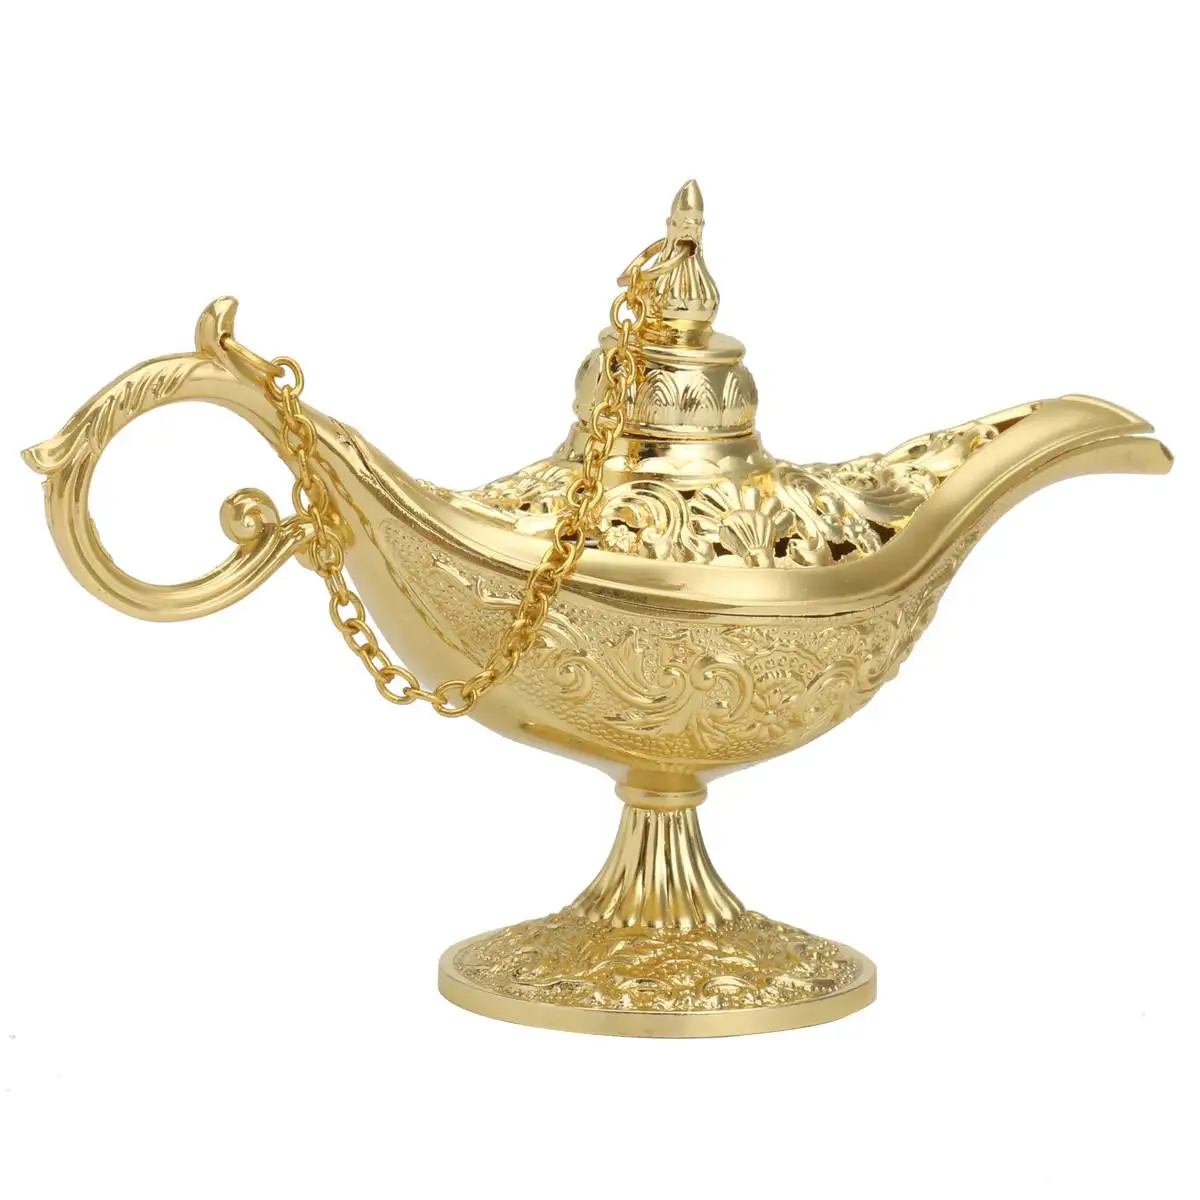 

12.8x8.2cm Collectable Classic Carved Rare Legend Aladdin Lamp Magic Light Lamp Metal Gold Zincalloy Home Decor Craft Gift New